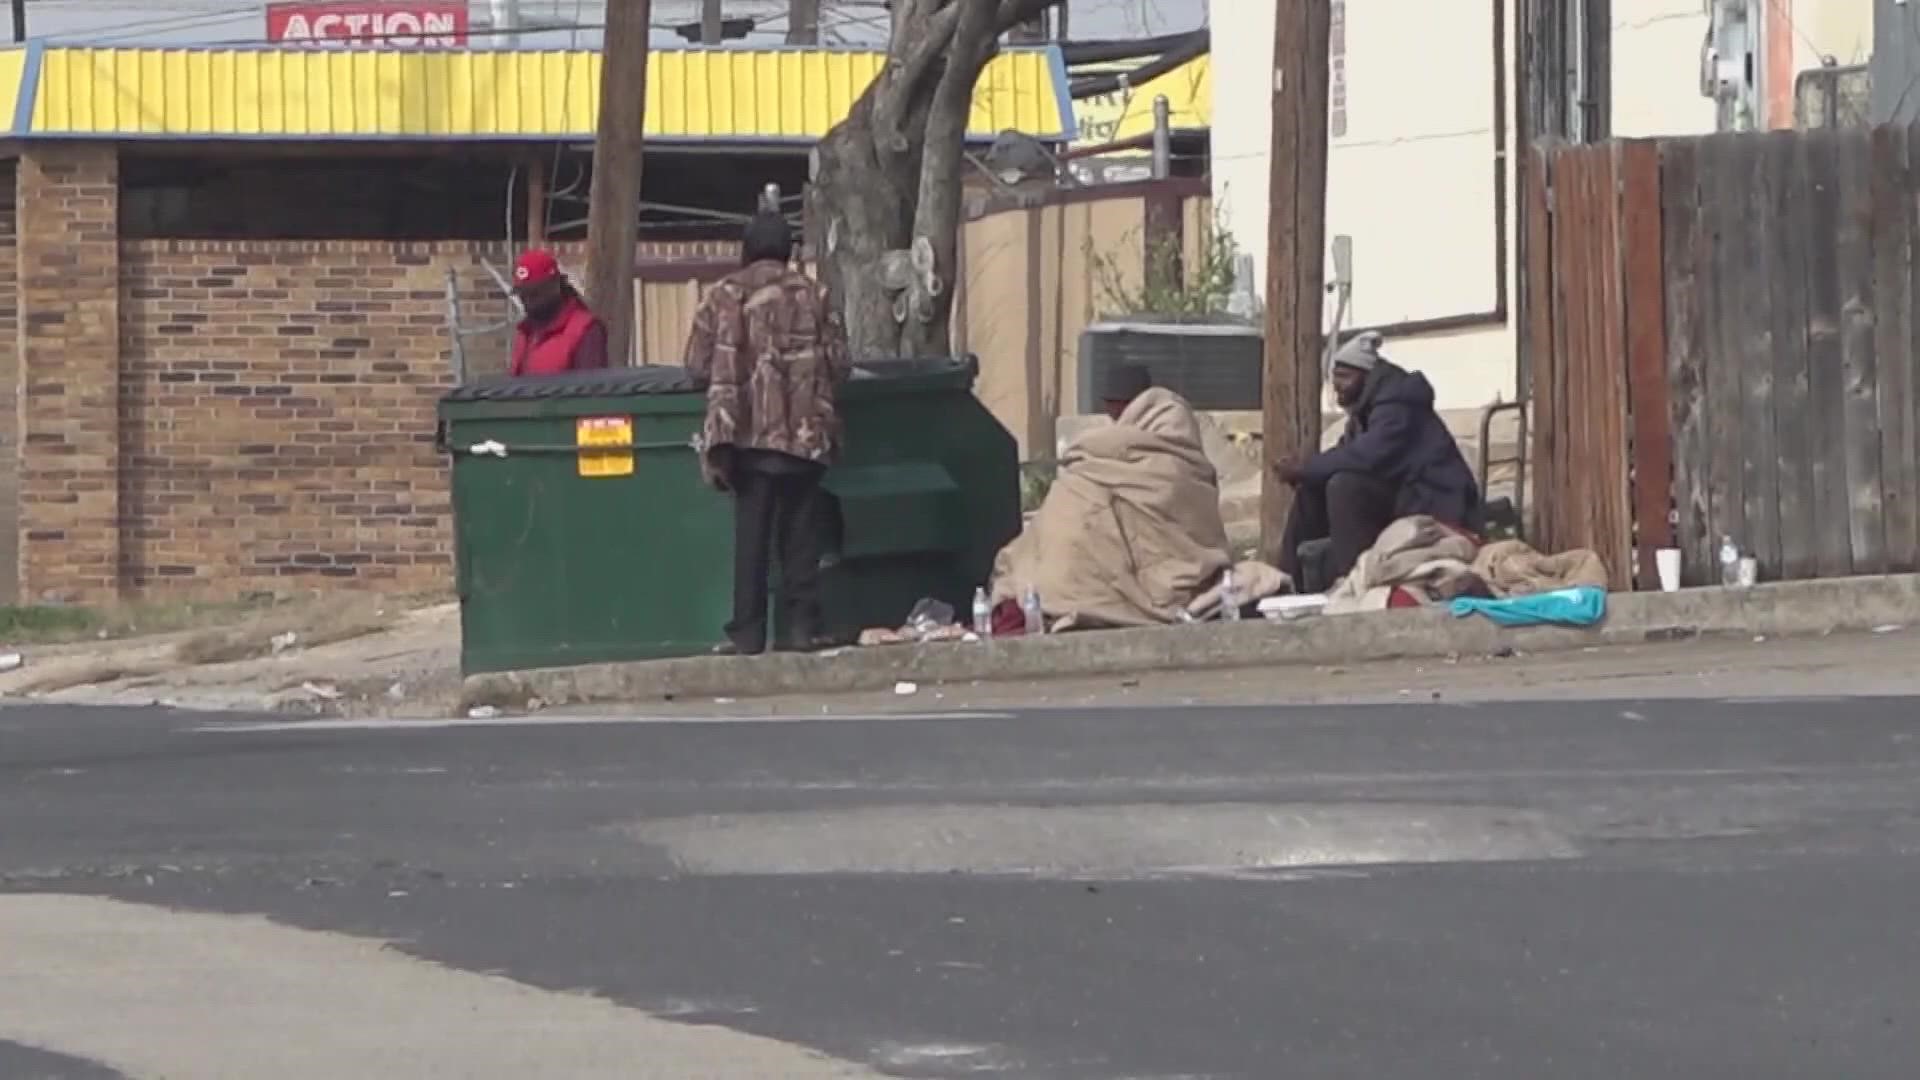 Turns out, 57 percent of the area's homeless don't have a direct connection to the county.